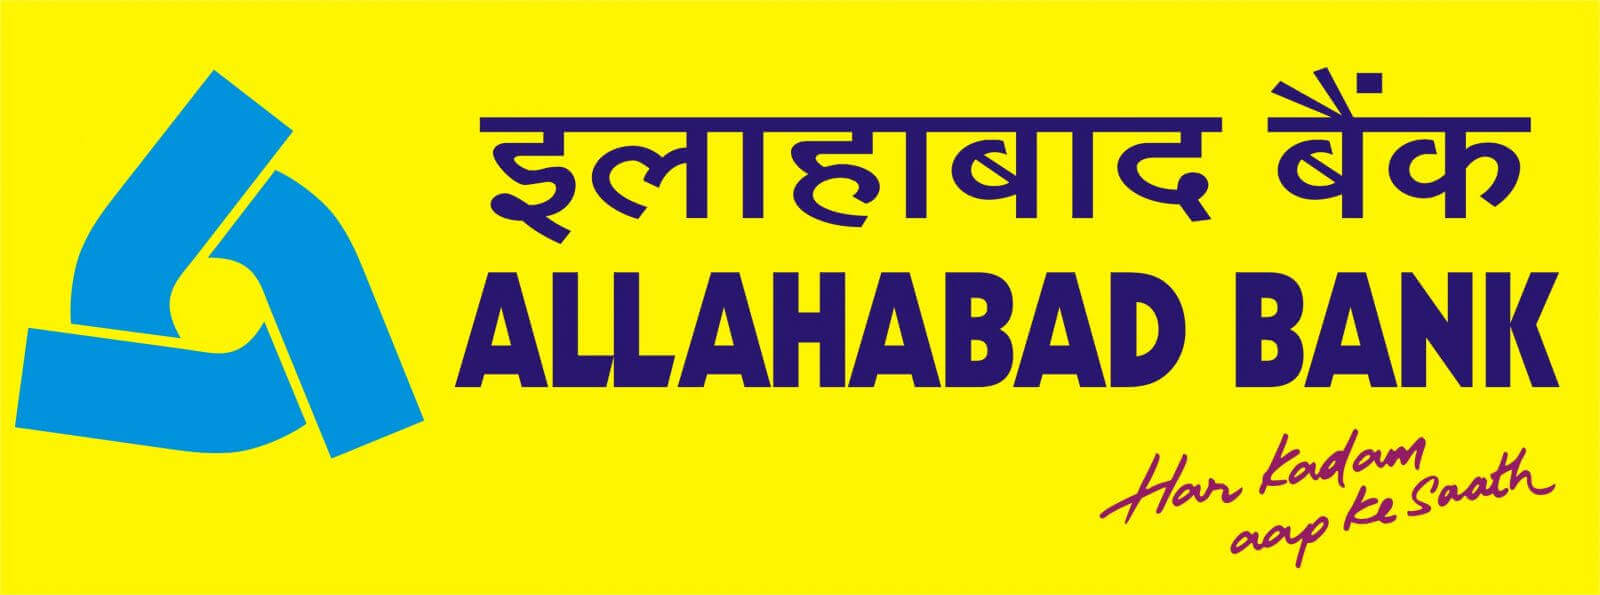 Allahabad Business Loan, Interest Rate and EMI Calculator